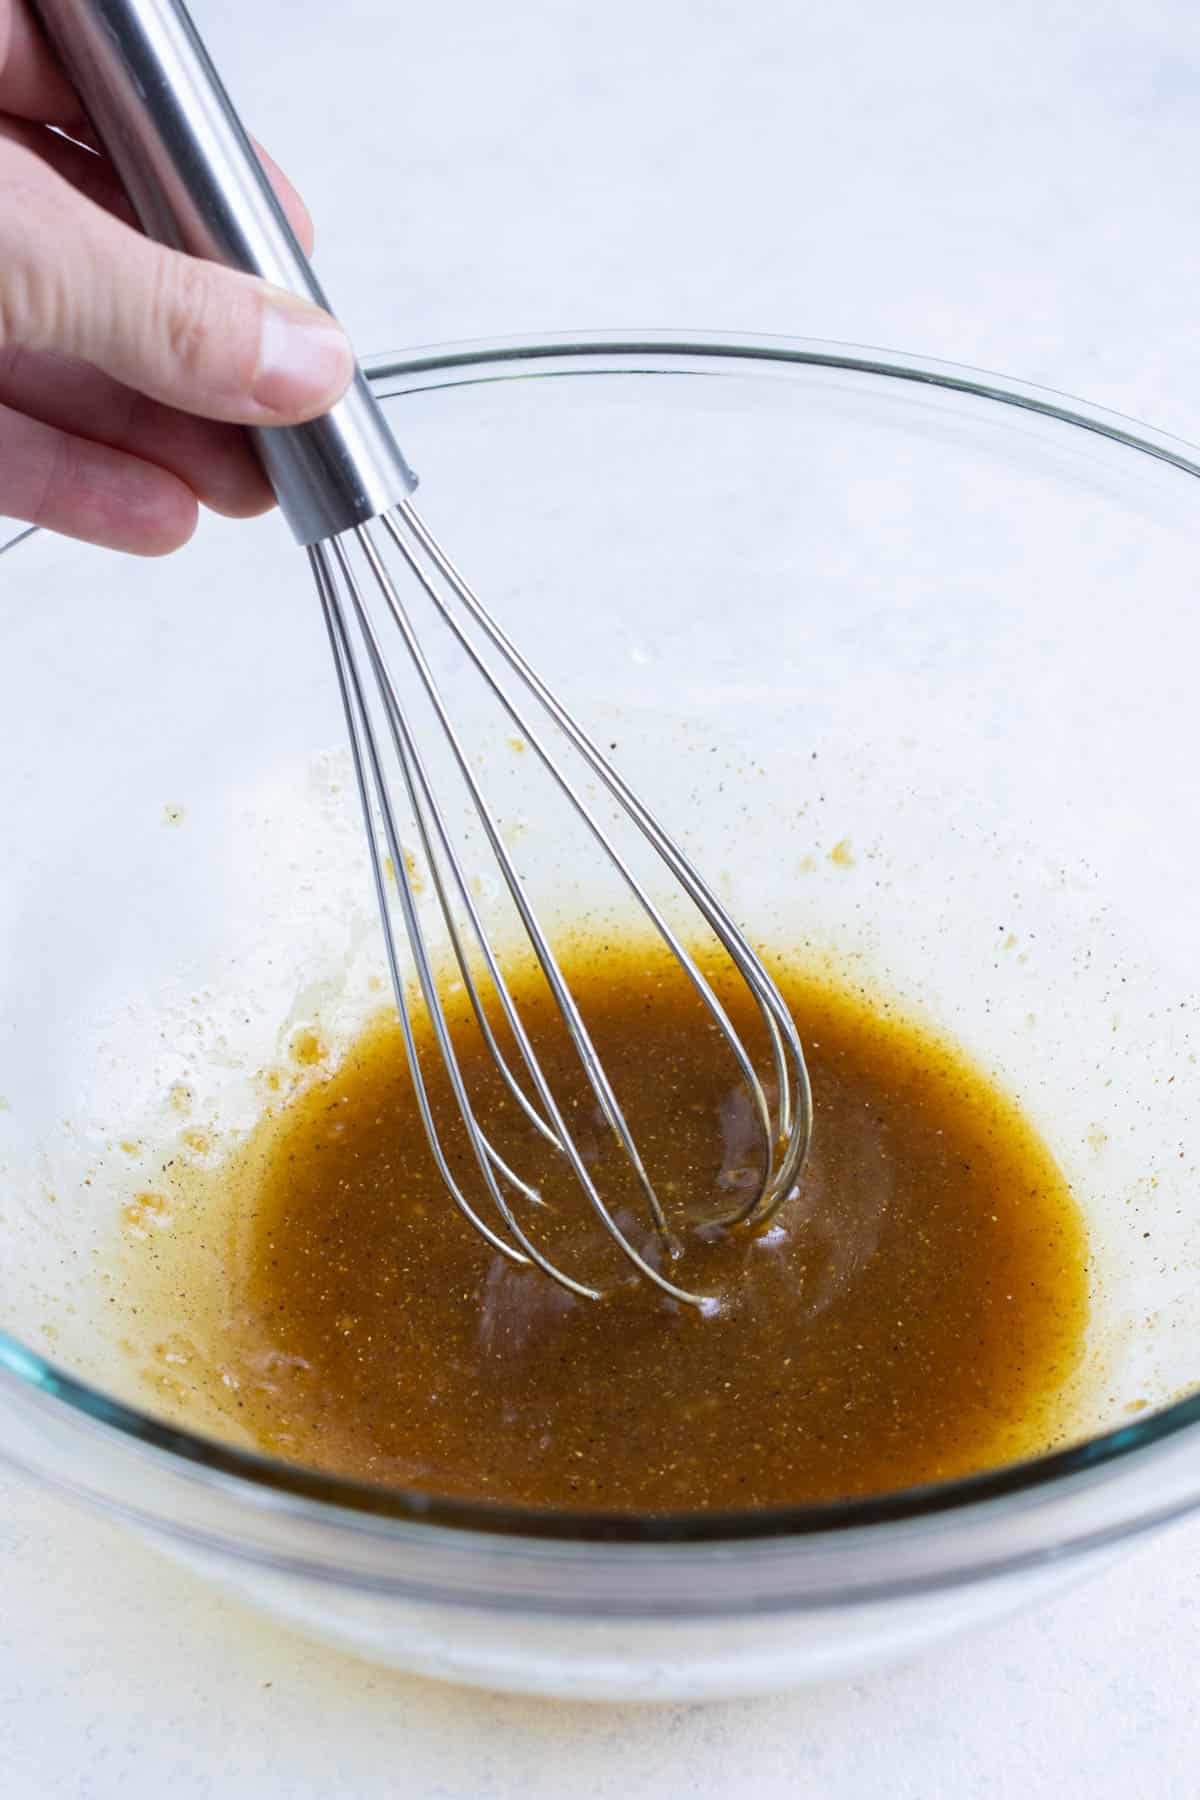 A sesame soy sauce is whisked in a bowl.